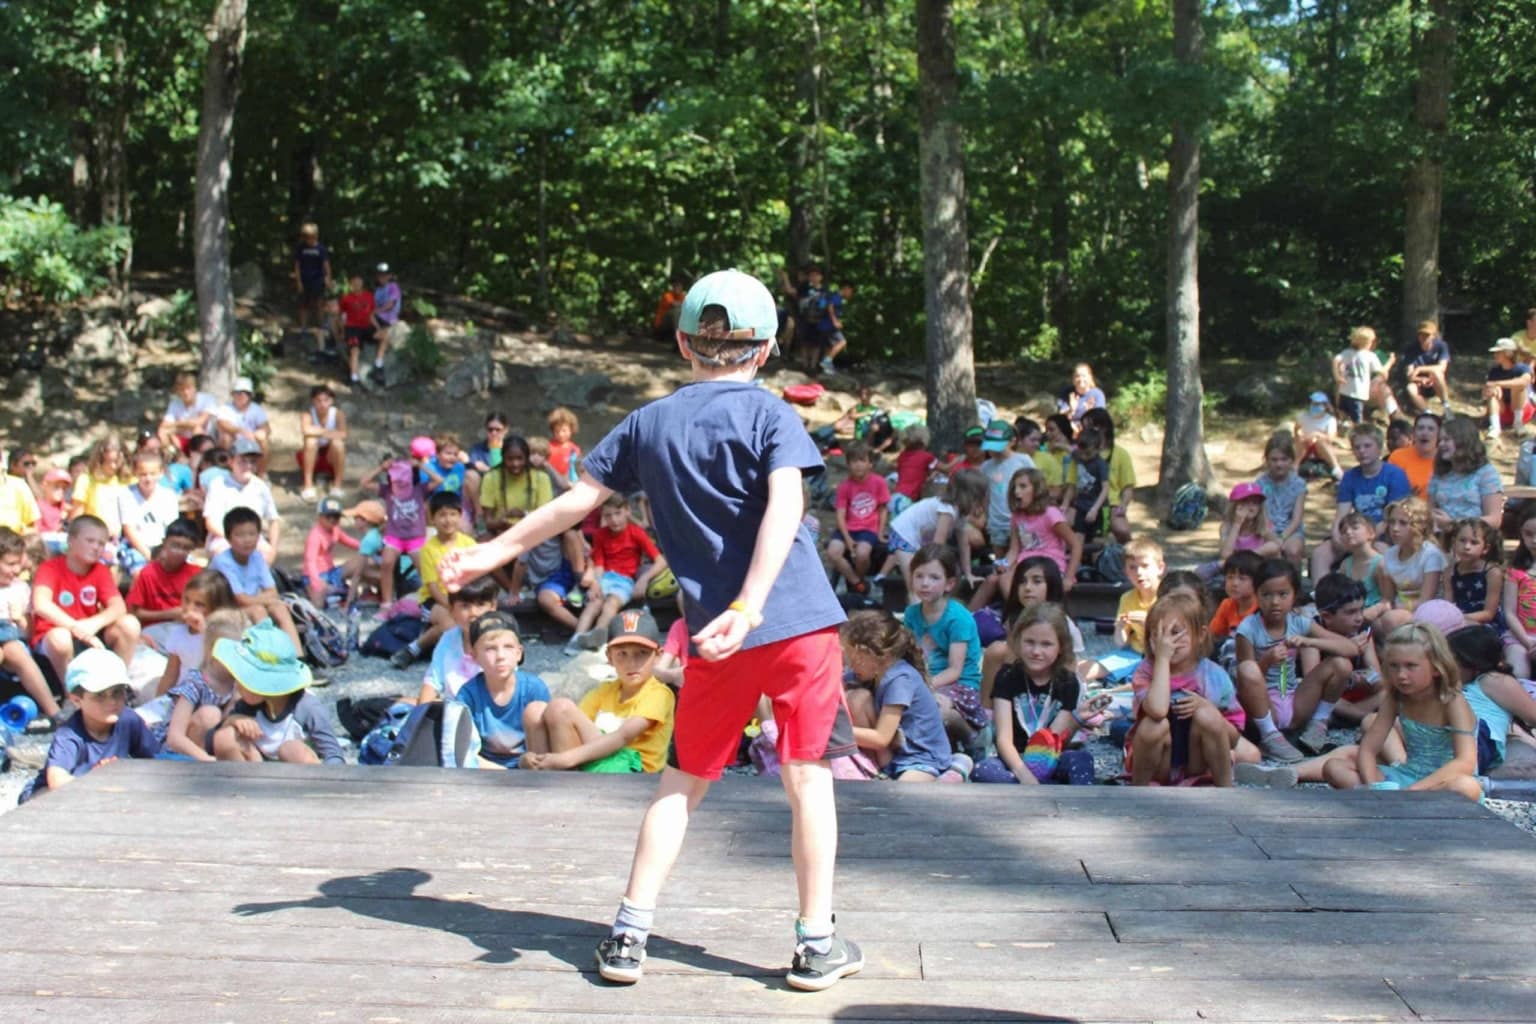 A boy is standing on a stage in front of a crowd of people.